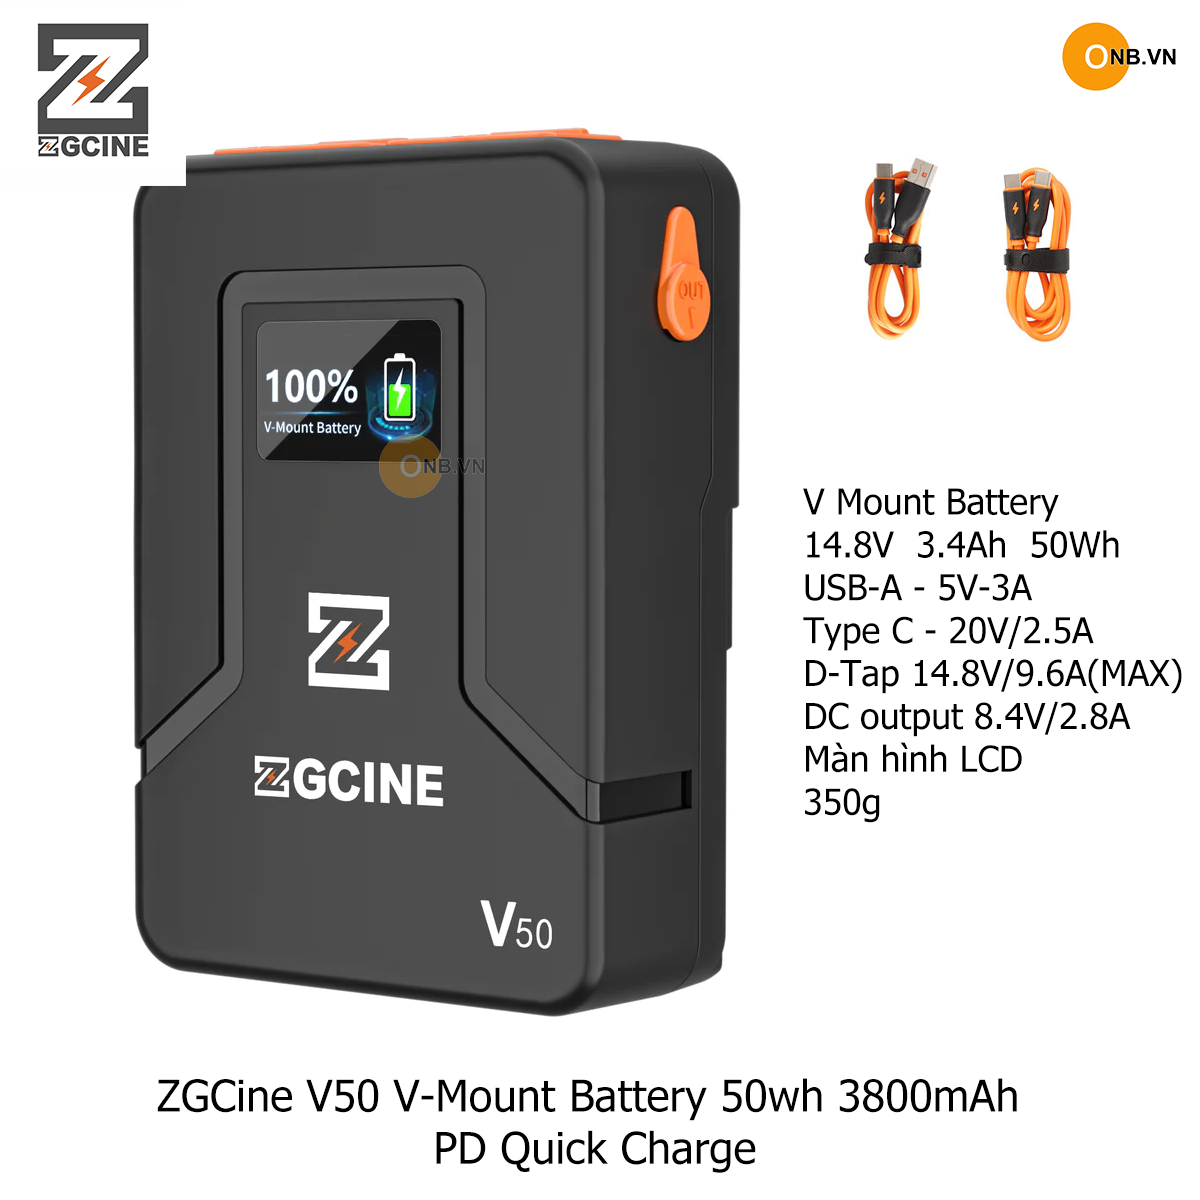 ZGCine V50 V-Mount Battery 50wh 3800mAh PD Quick Charge